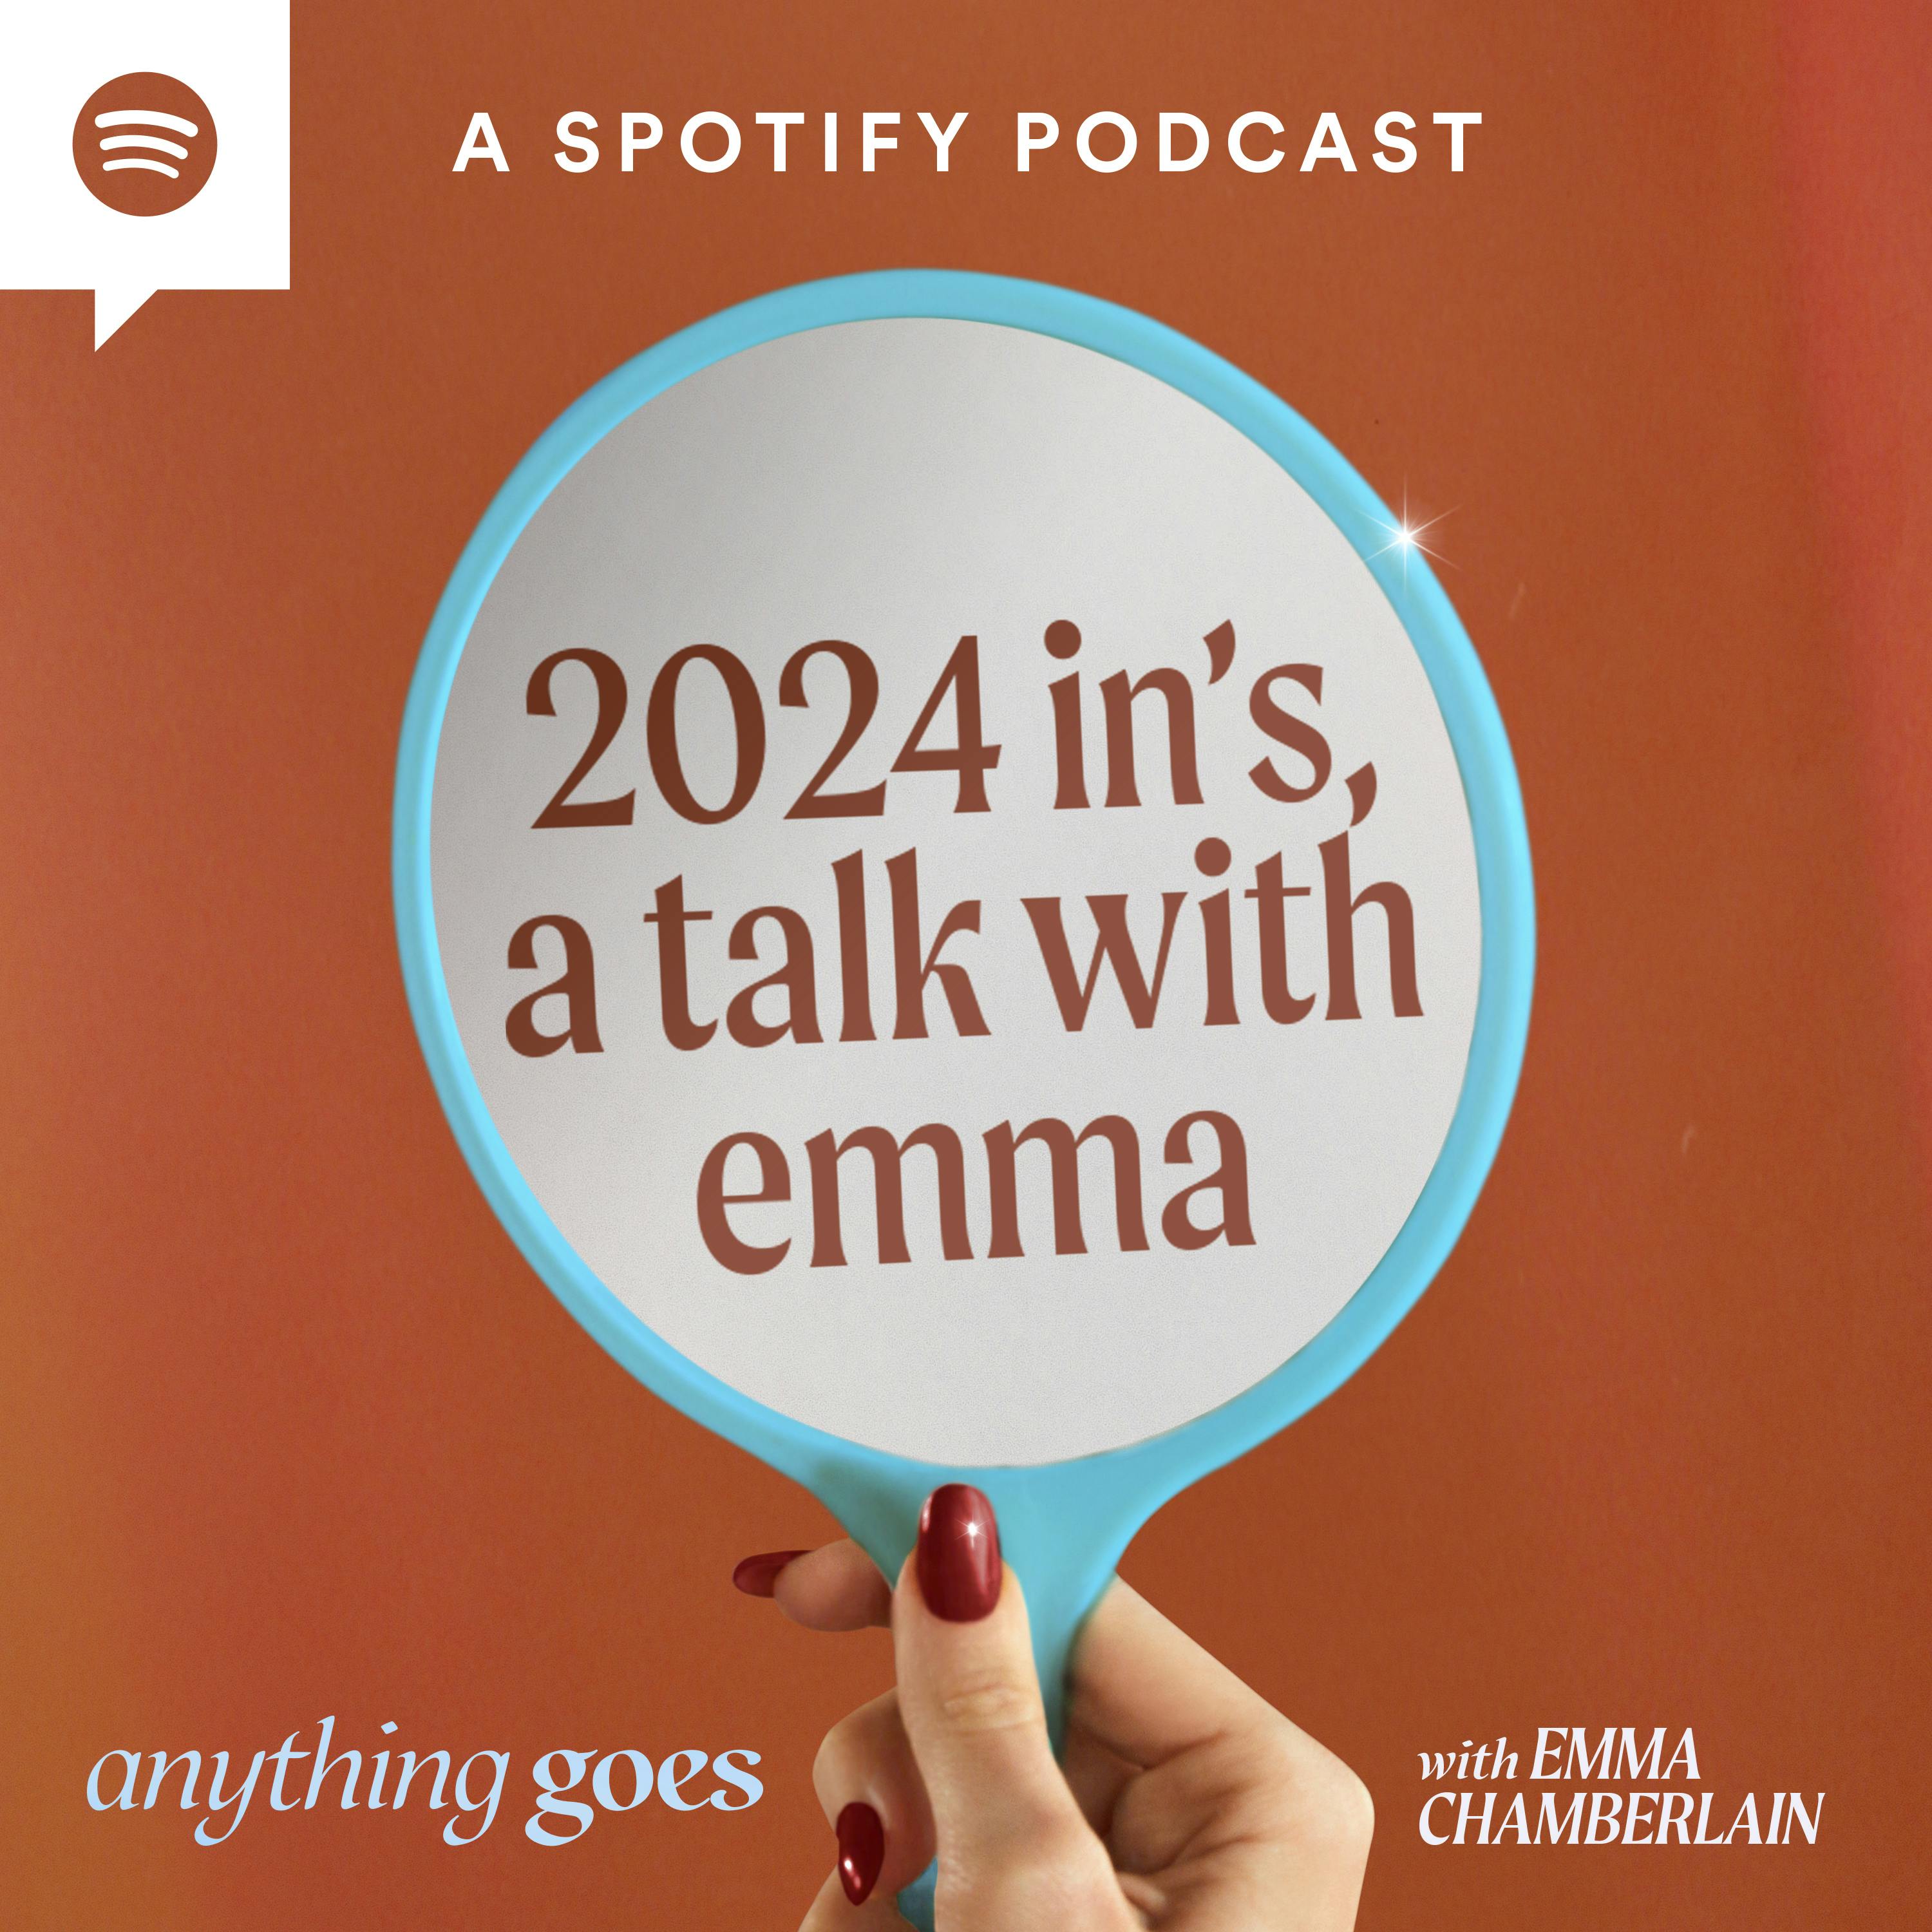 2024 in's, a talk with emma